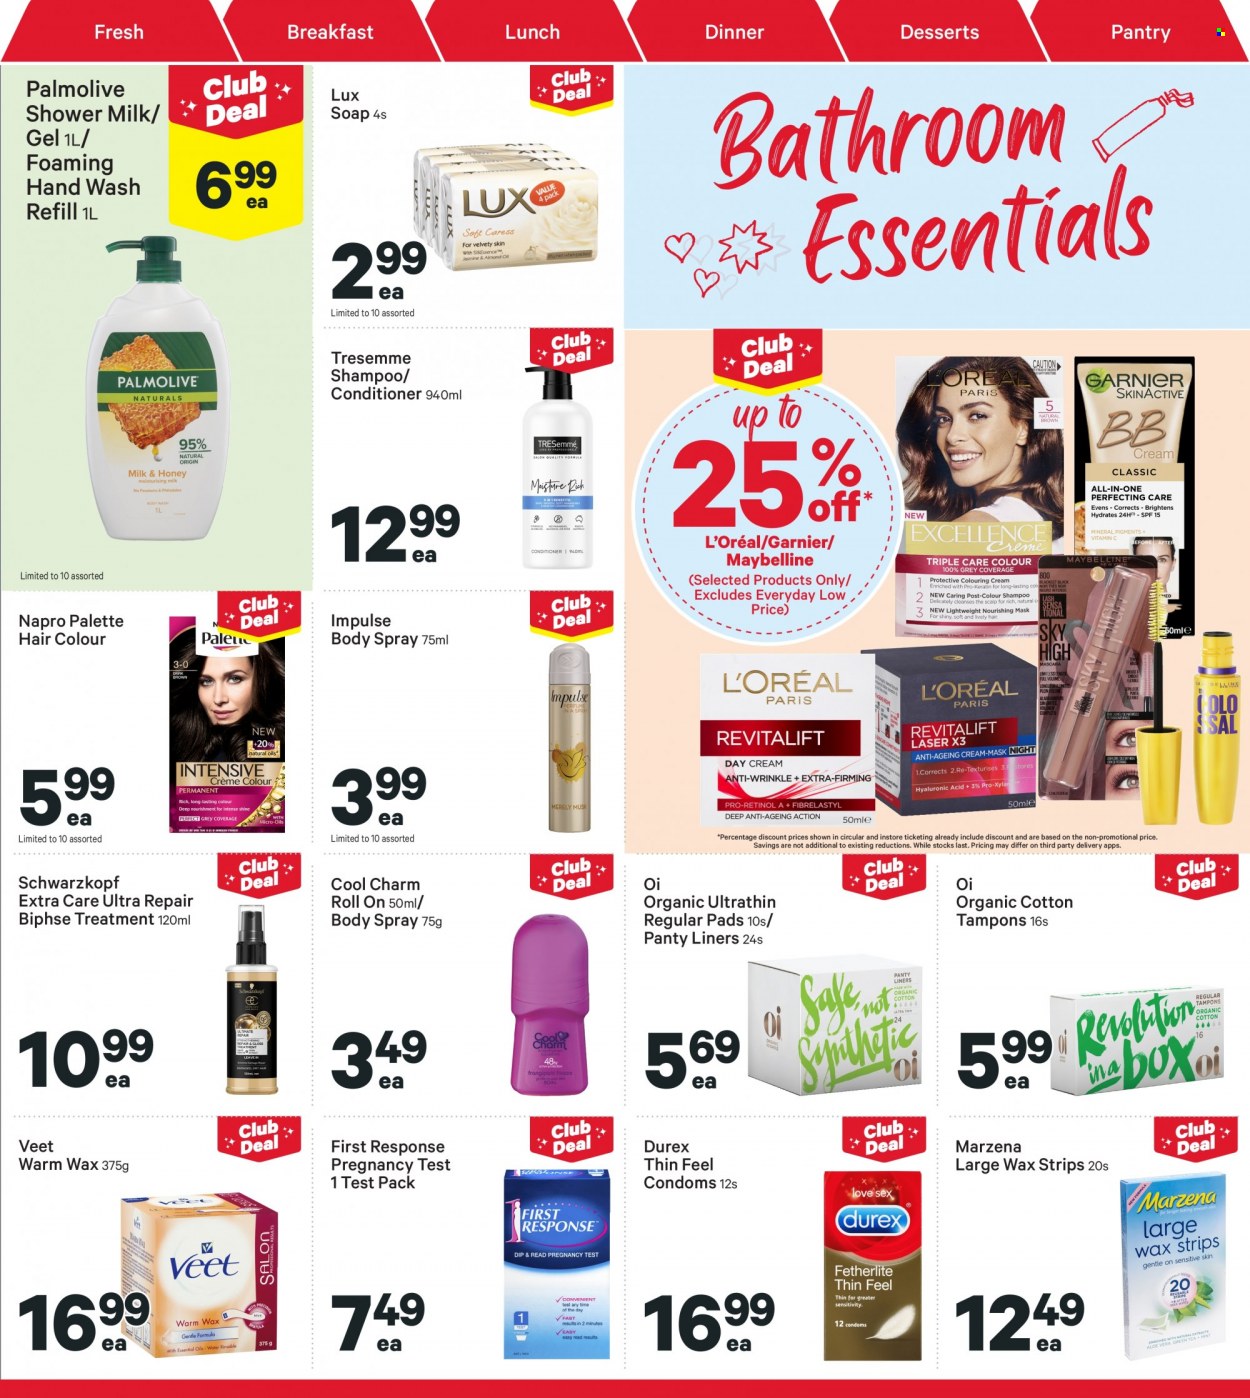 thumbnail - New World mailer - 05.12.2022 - 11.12.2022 - Sales products - milk, Lux, shampoo, hand soap, Schwarzkopf, hand wash, Palmolive, soap, tampons, Garnier, L’Oréal, conditioner, TRESemmé, Palette, hair color, body spray, roll-on, Veet, wax strips, Maybelline, pregnancy test. Page 27.